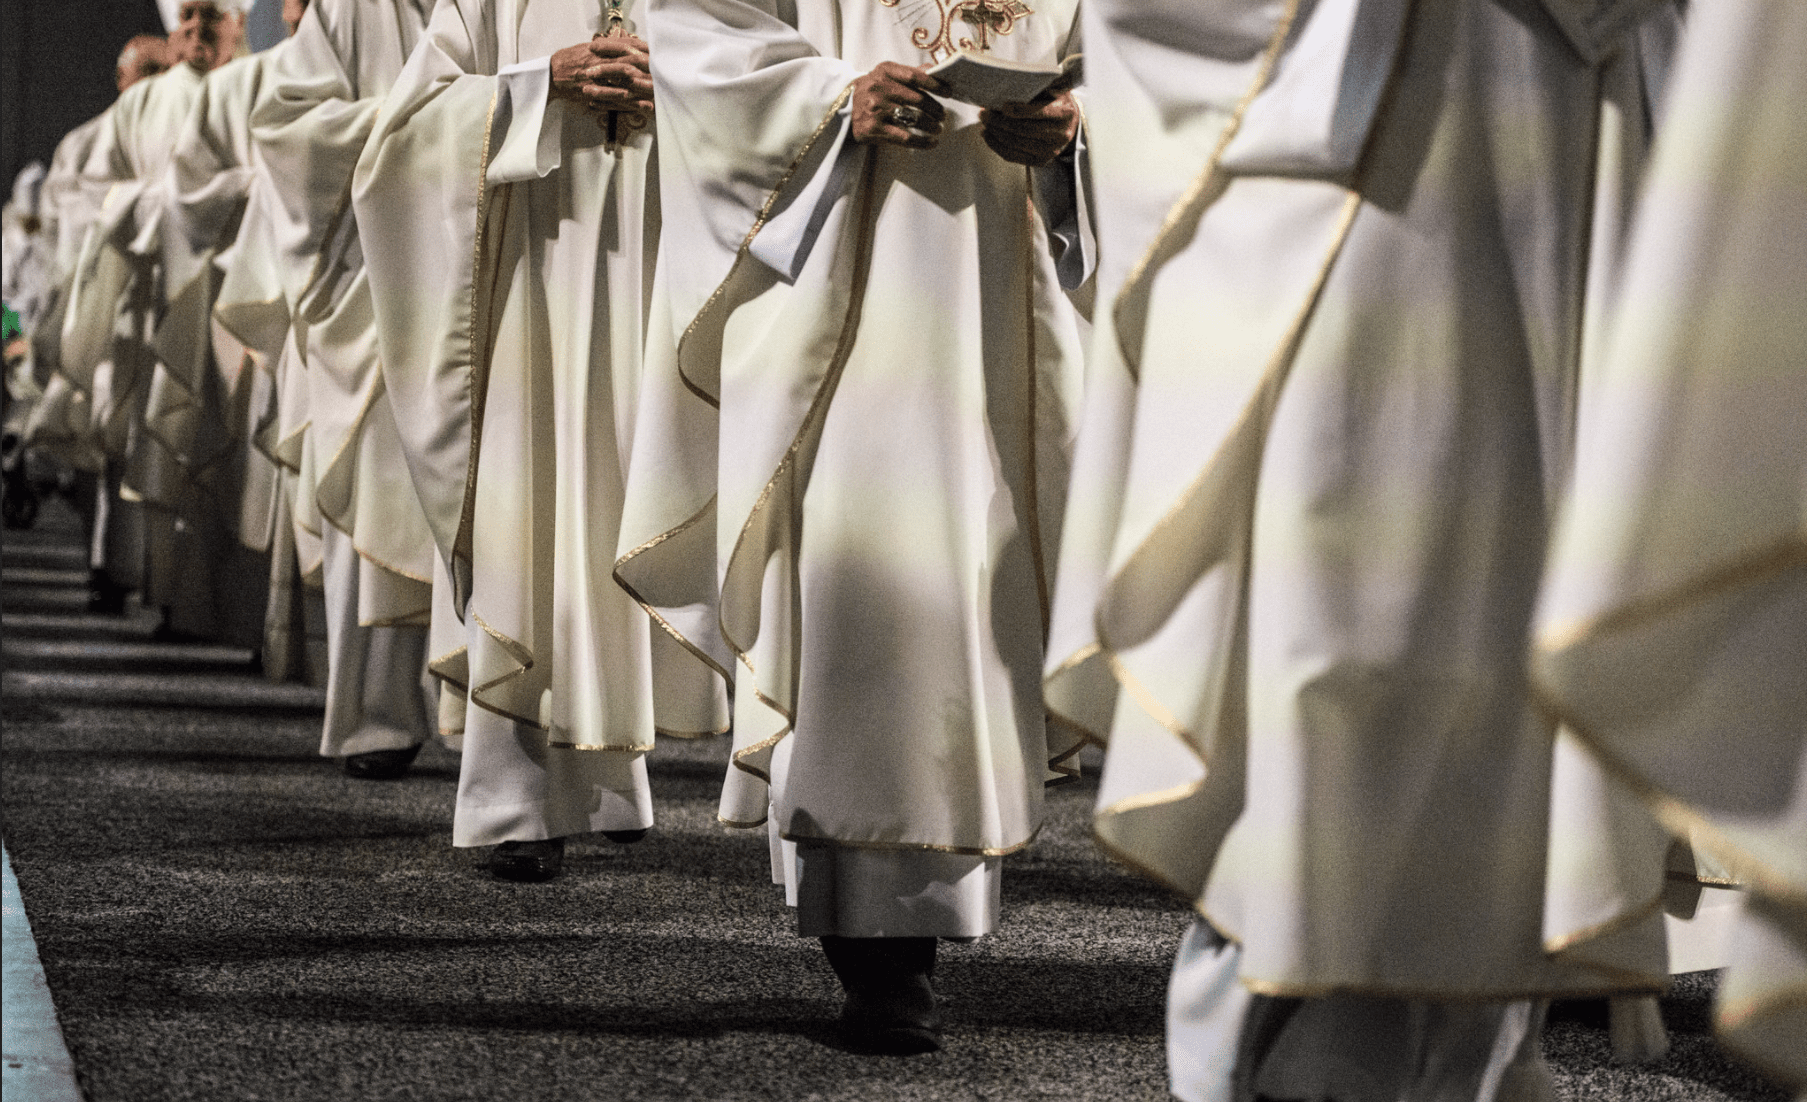 A Summary of Common Gestures, Part I — Liturgical Traditions